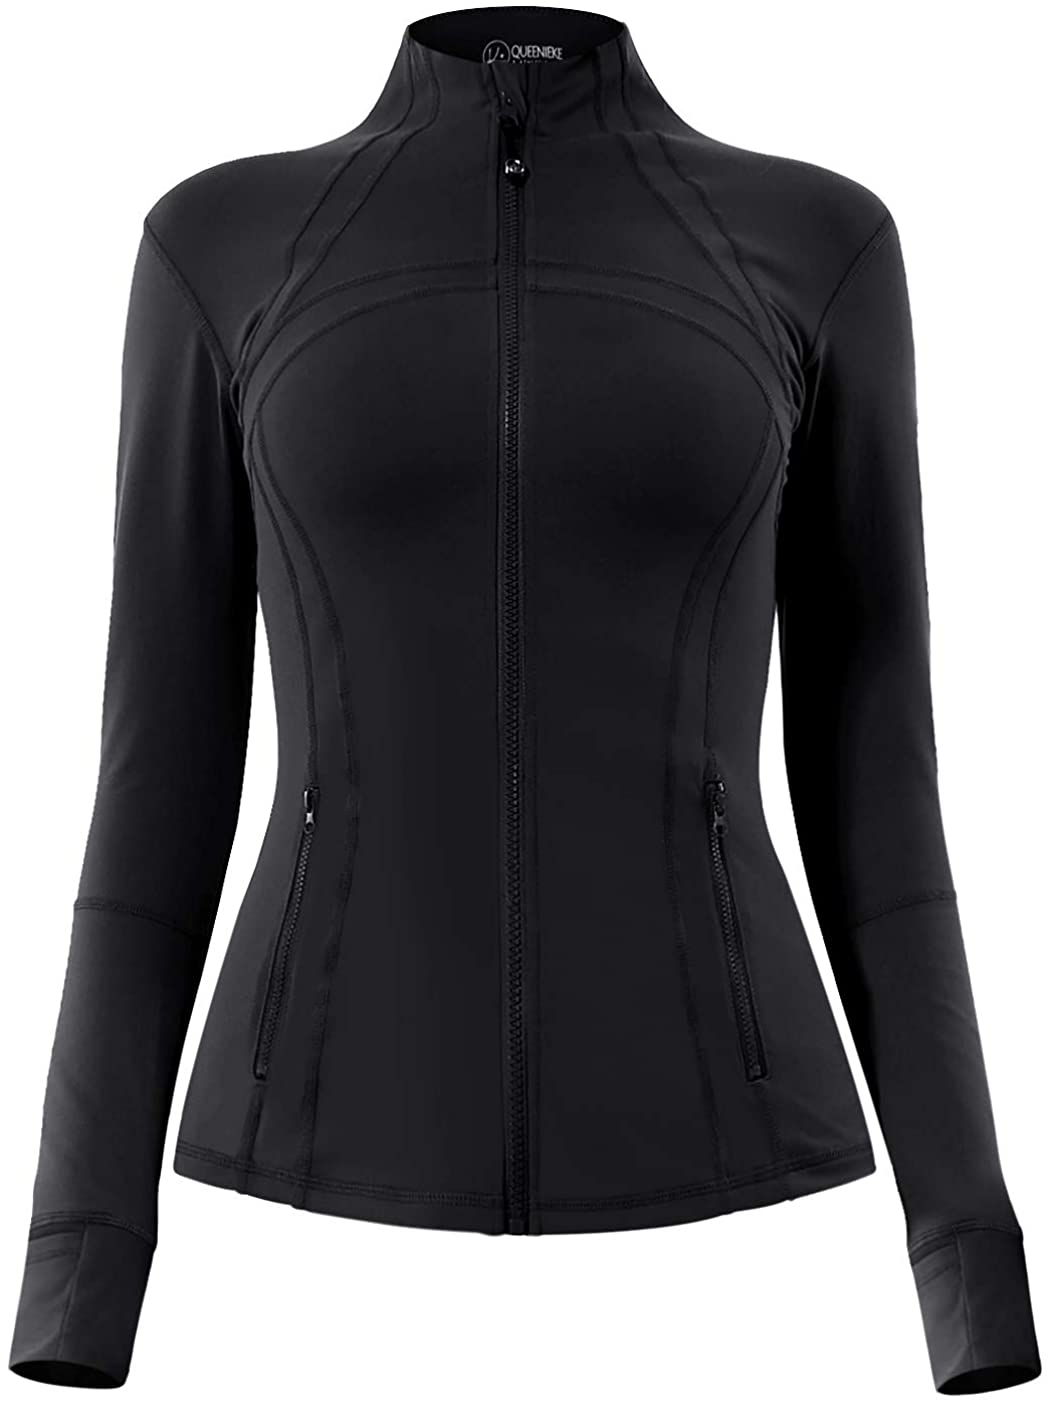 QUEENIEKE Womens Running Jacket Slim Fit and Cottony-Soft Handfeel Sports Tops with Full Zip Side Pocket 